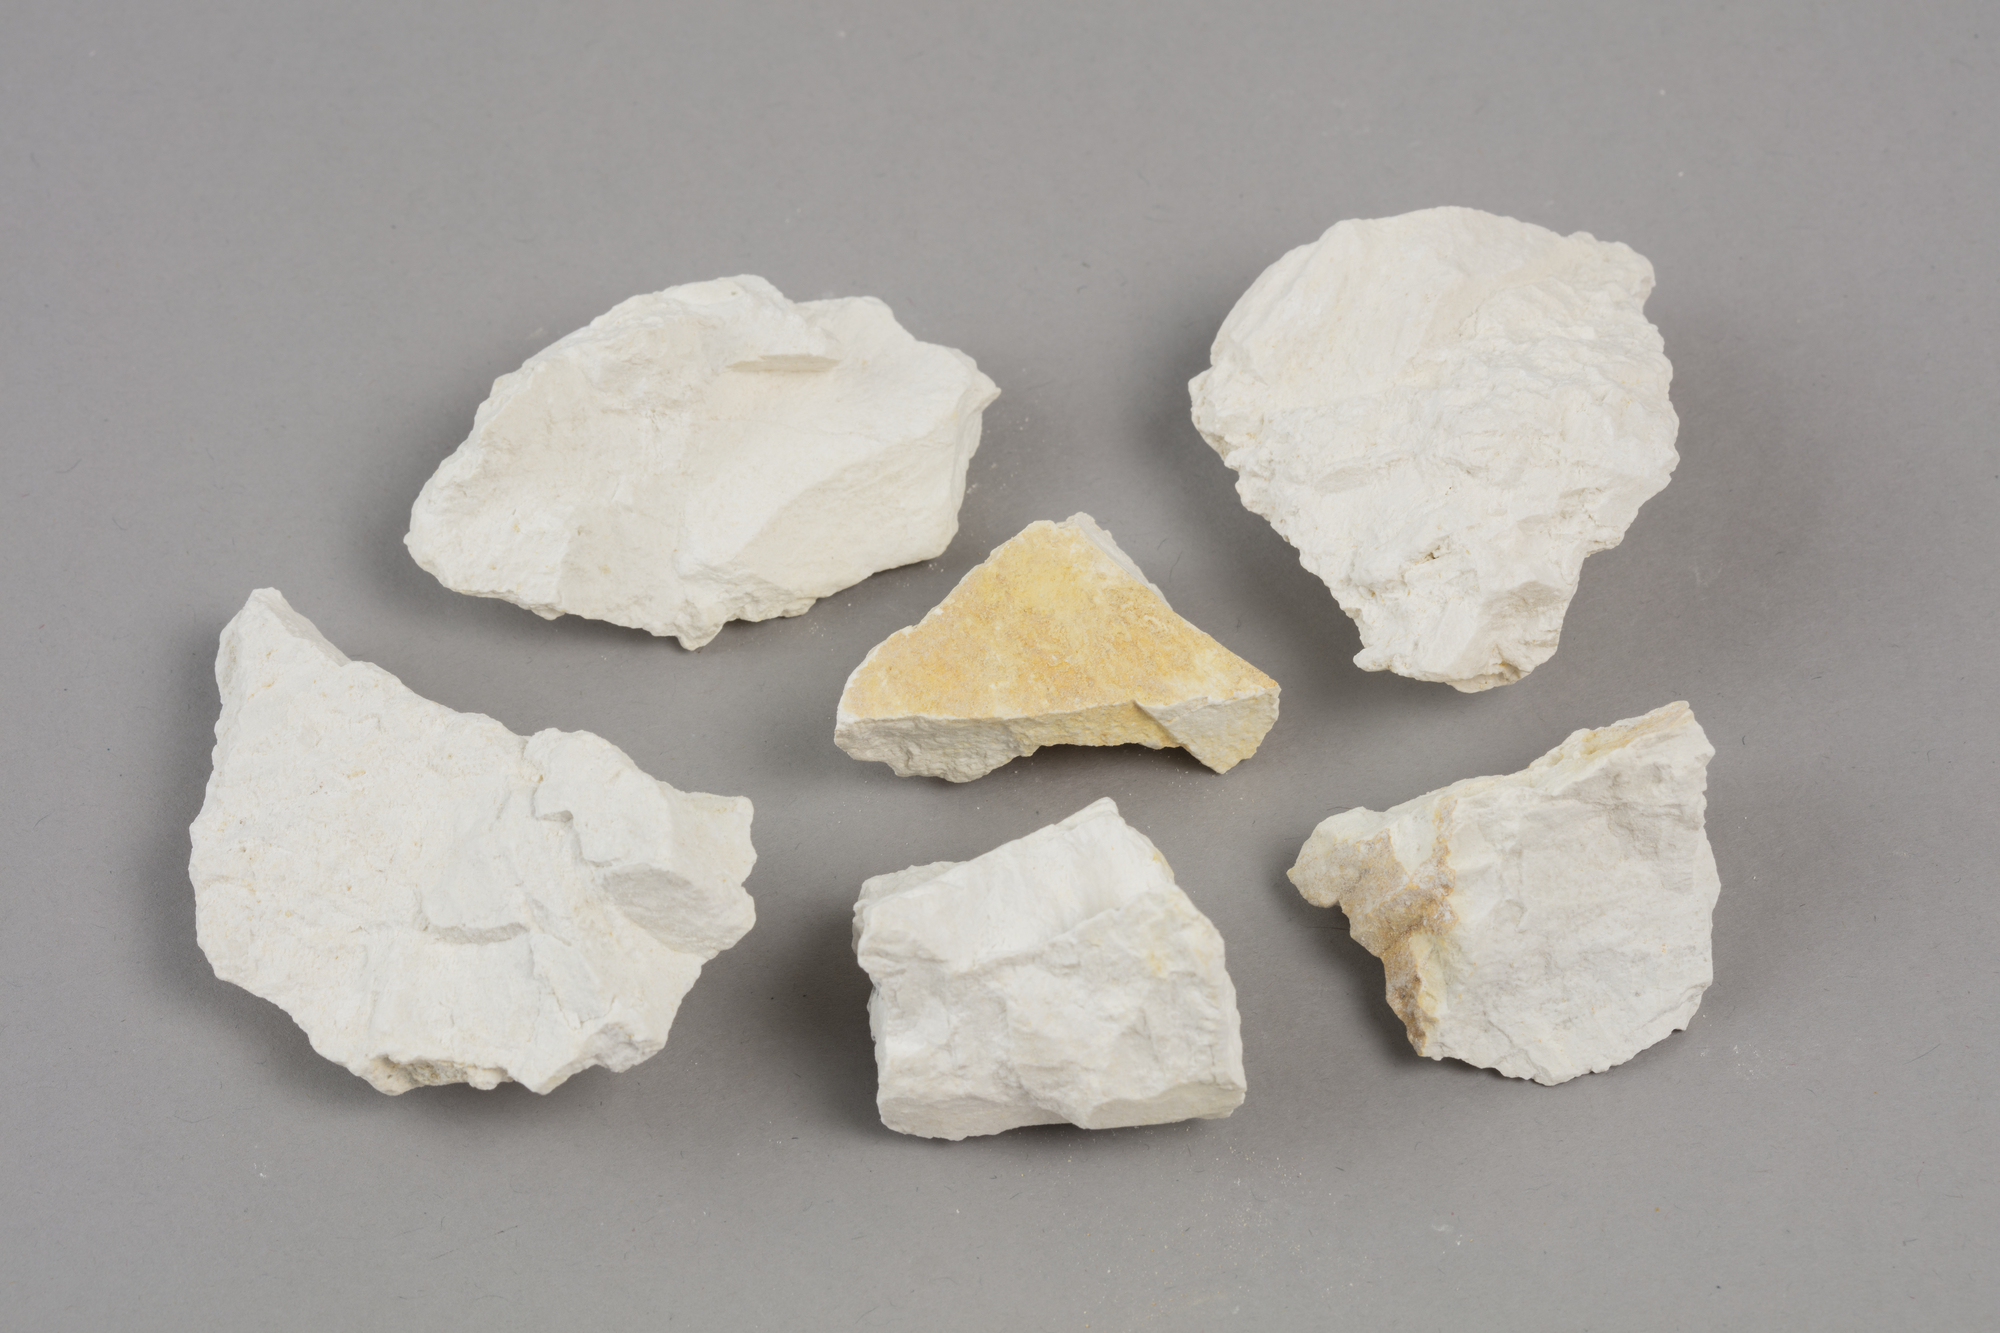 six pieces of porcelain stone used to make porcelain